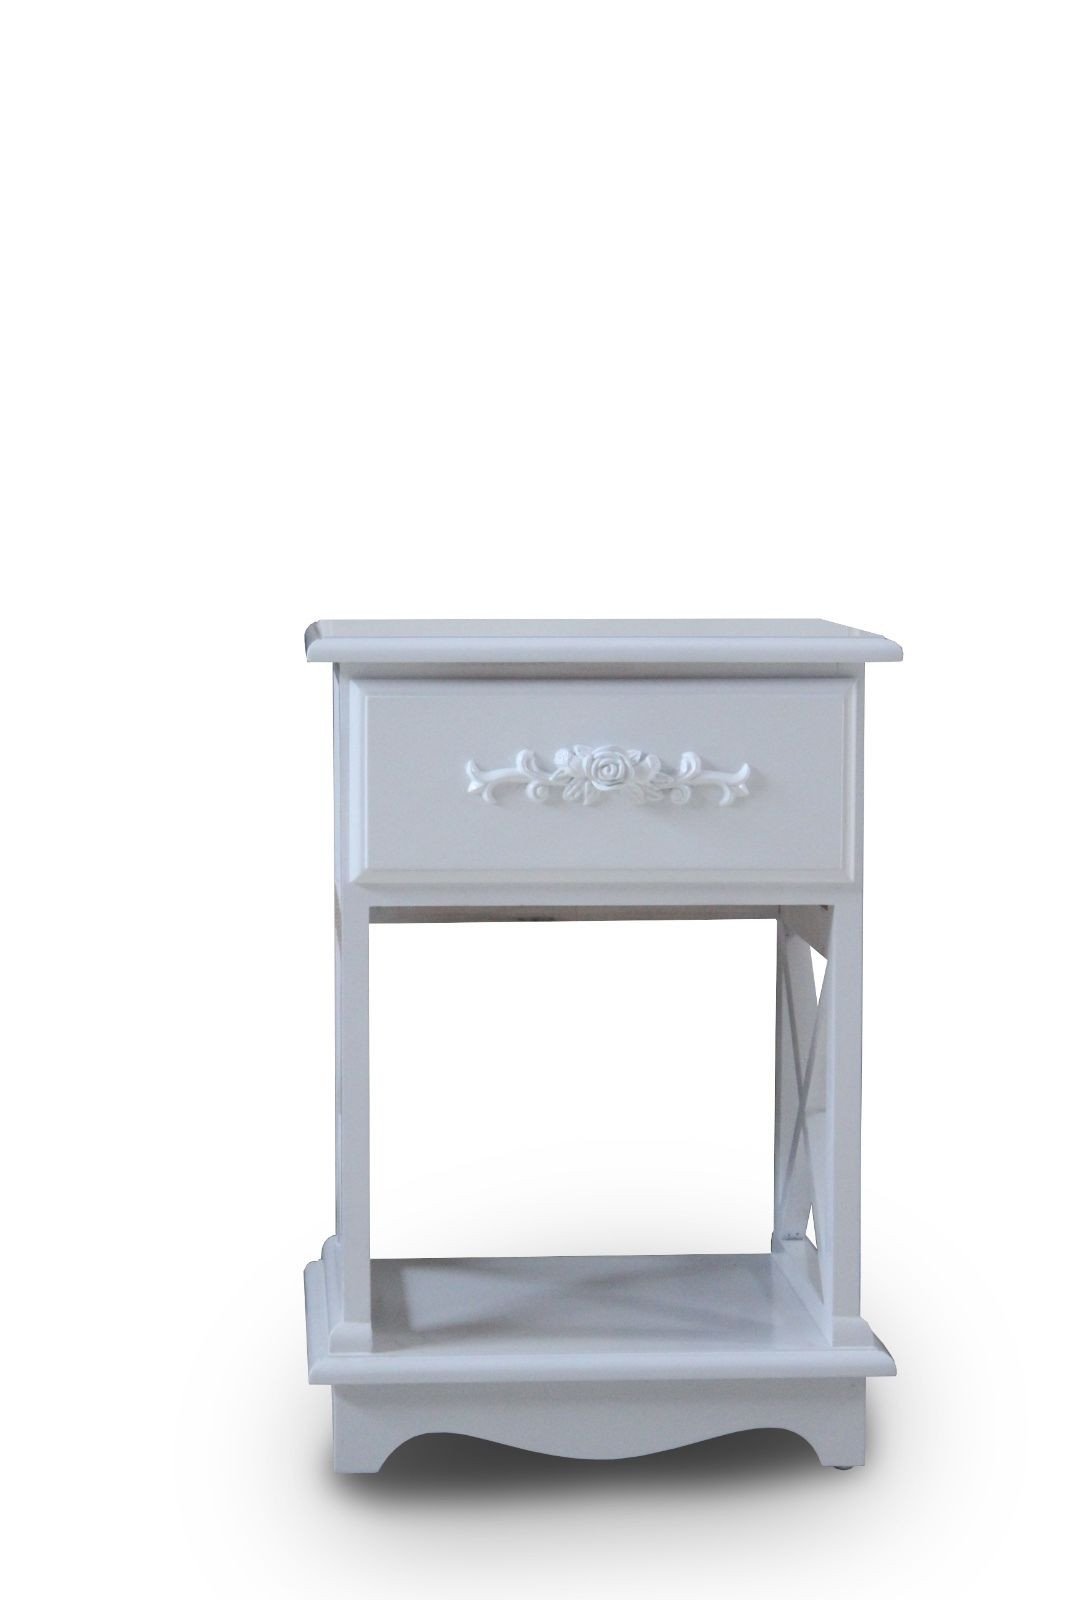 Shabby Chic WHITE ROSE SOLID WOOD BEDSIDE CABINET NIGHTSTAND TABLE